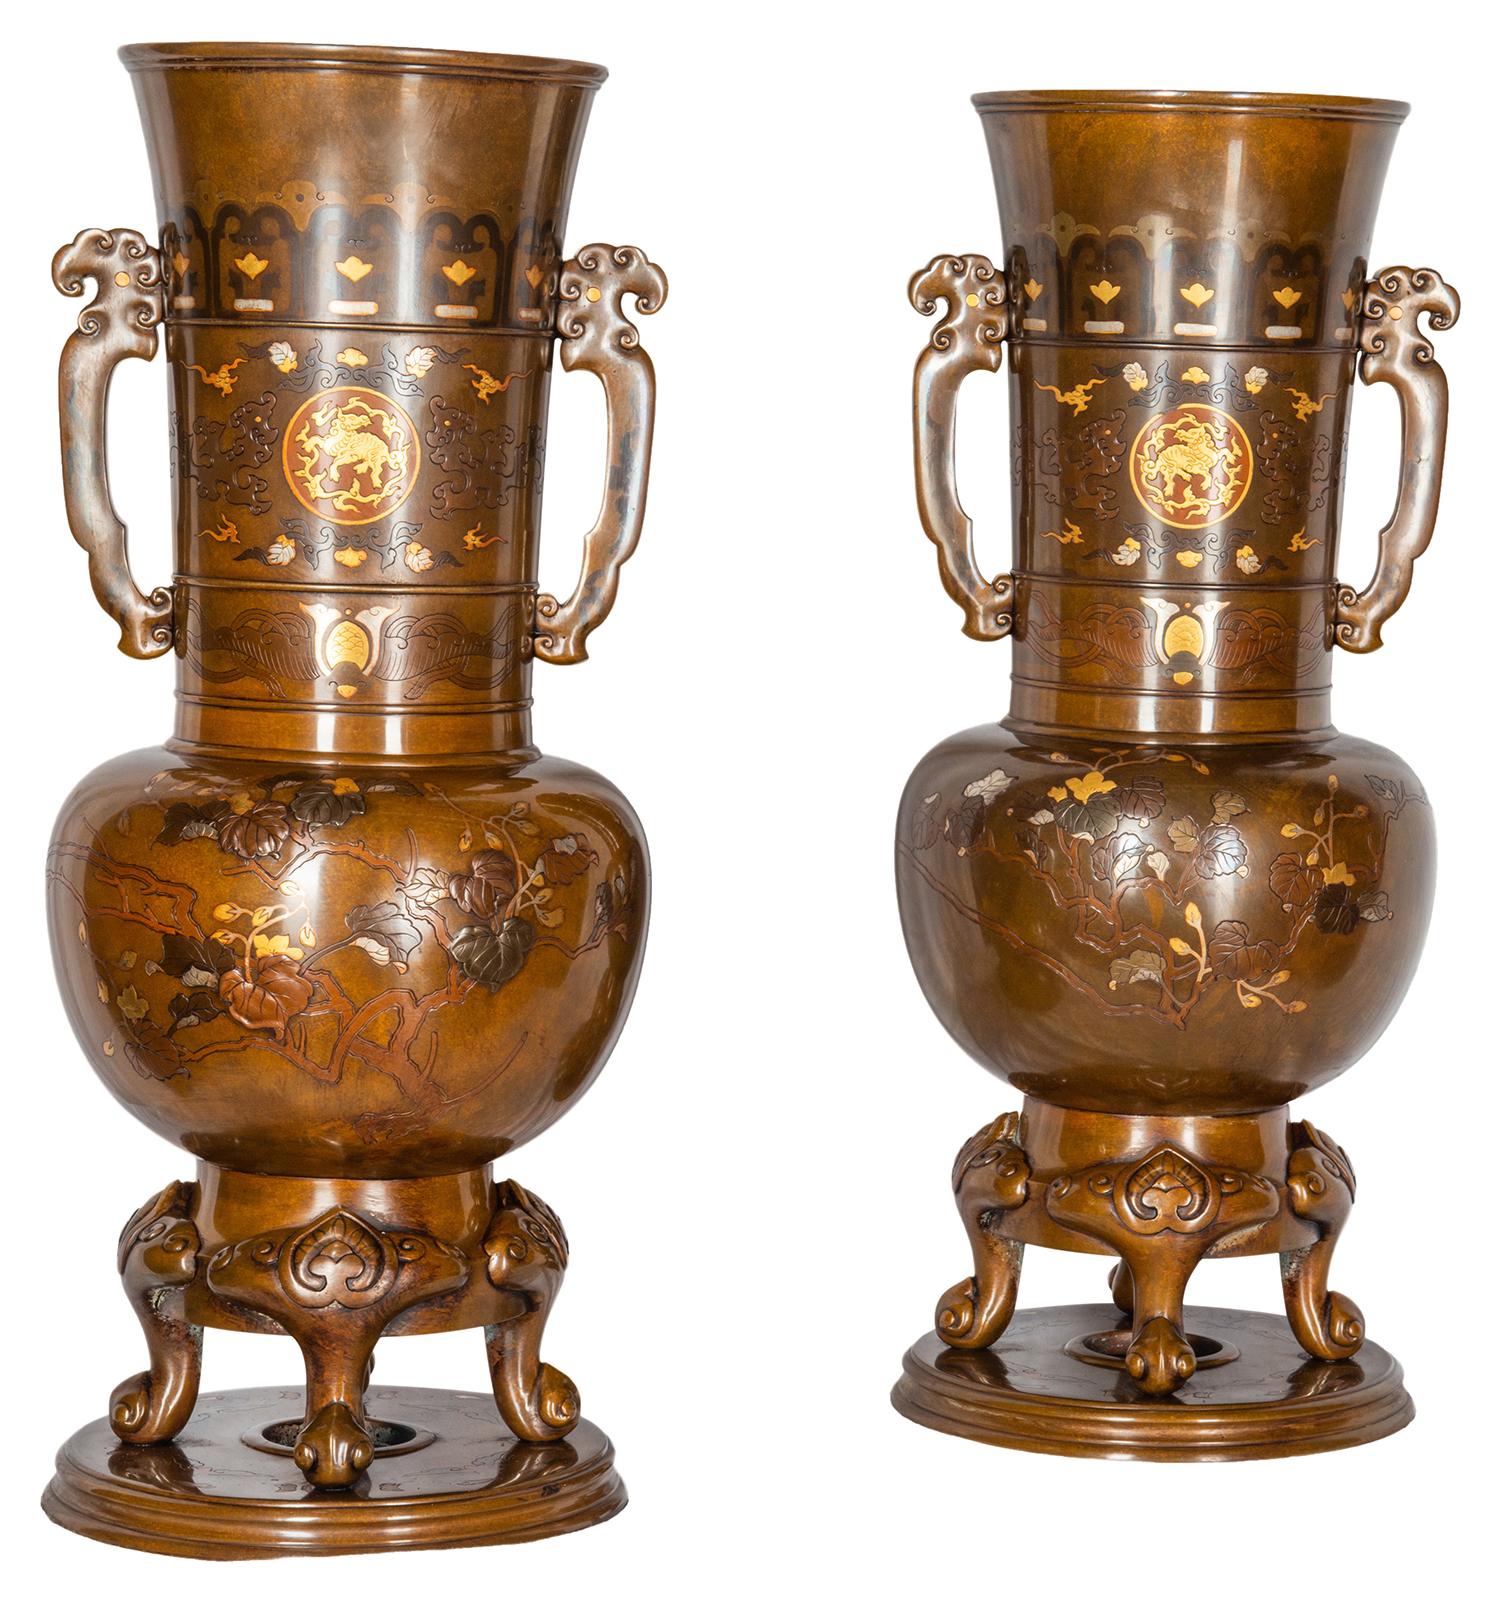 Pair of fine quality Japanese Meiji period (1868-1912) patinated bronze Miyao style gold and silver overlay two handled vases, each with twin handles, classical motif decoration with mythical creatures engraved and wonderful trees, leaves and buds.